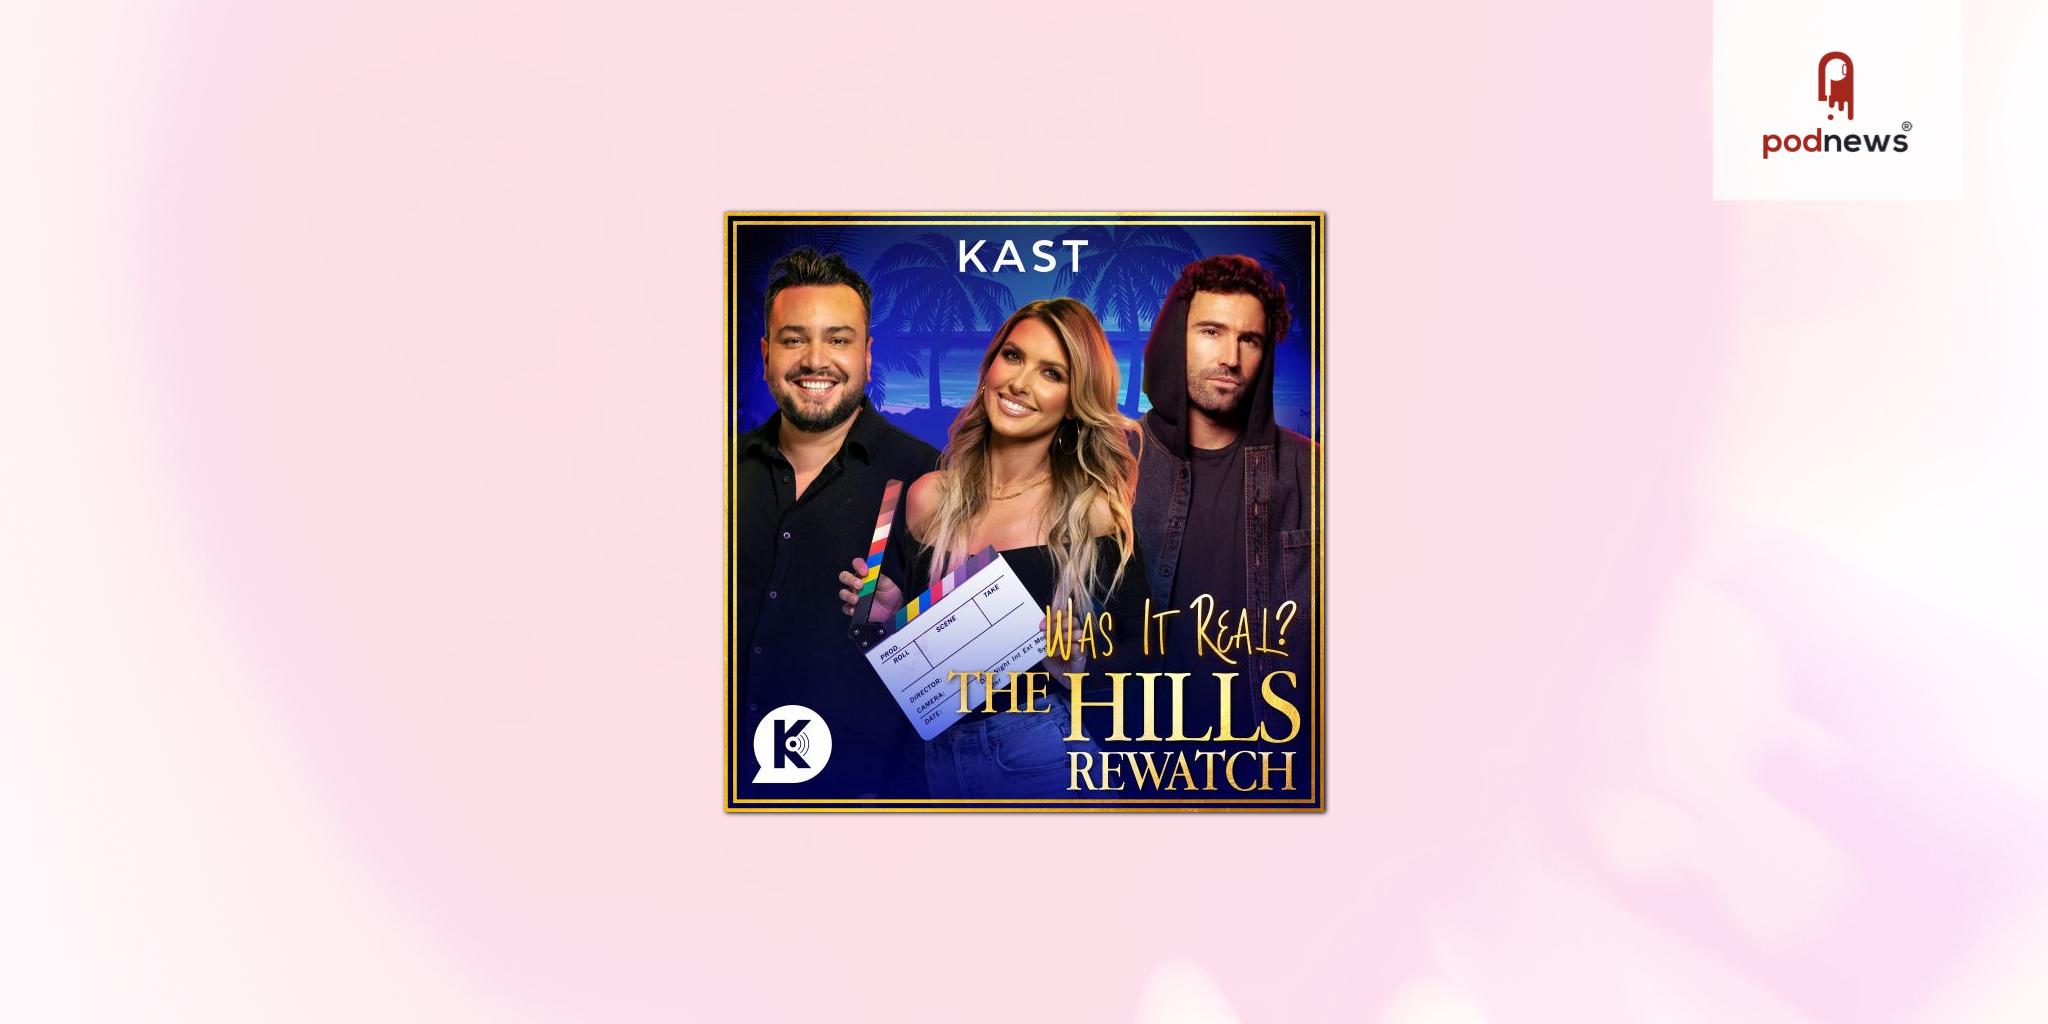 Kast Media Announces The Hills Rewatch Podcast with Audrina Patridge, Brody Jenner, and Frankie Delgado 